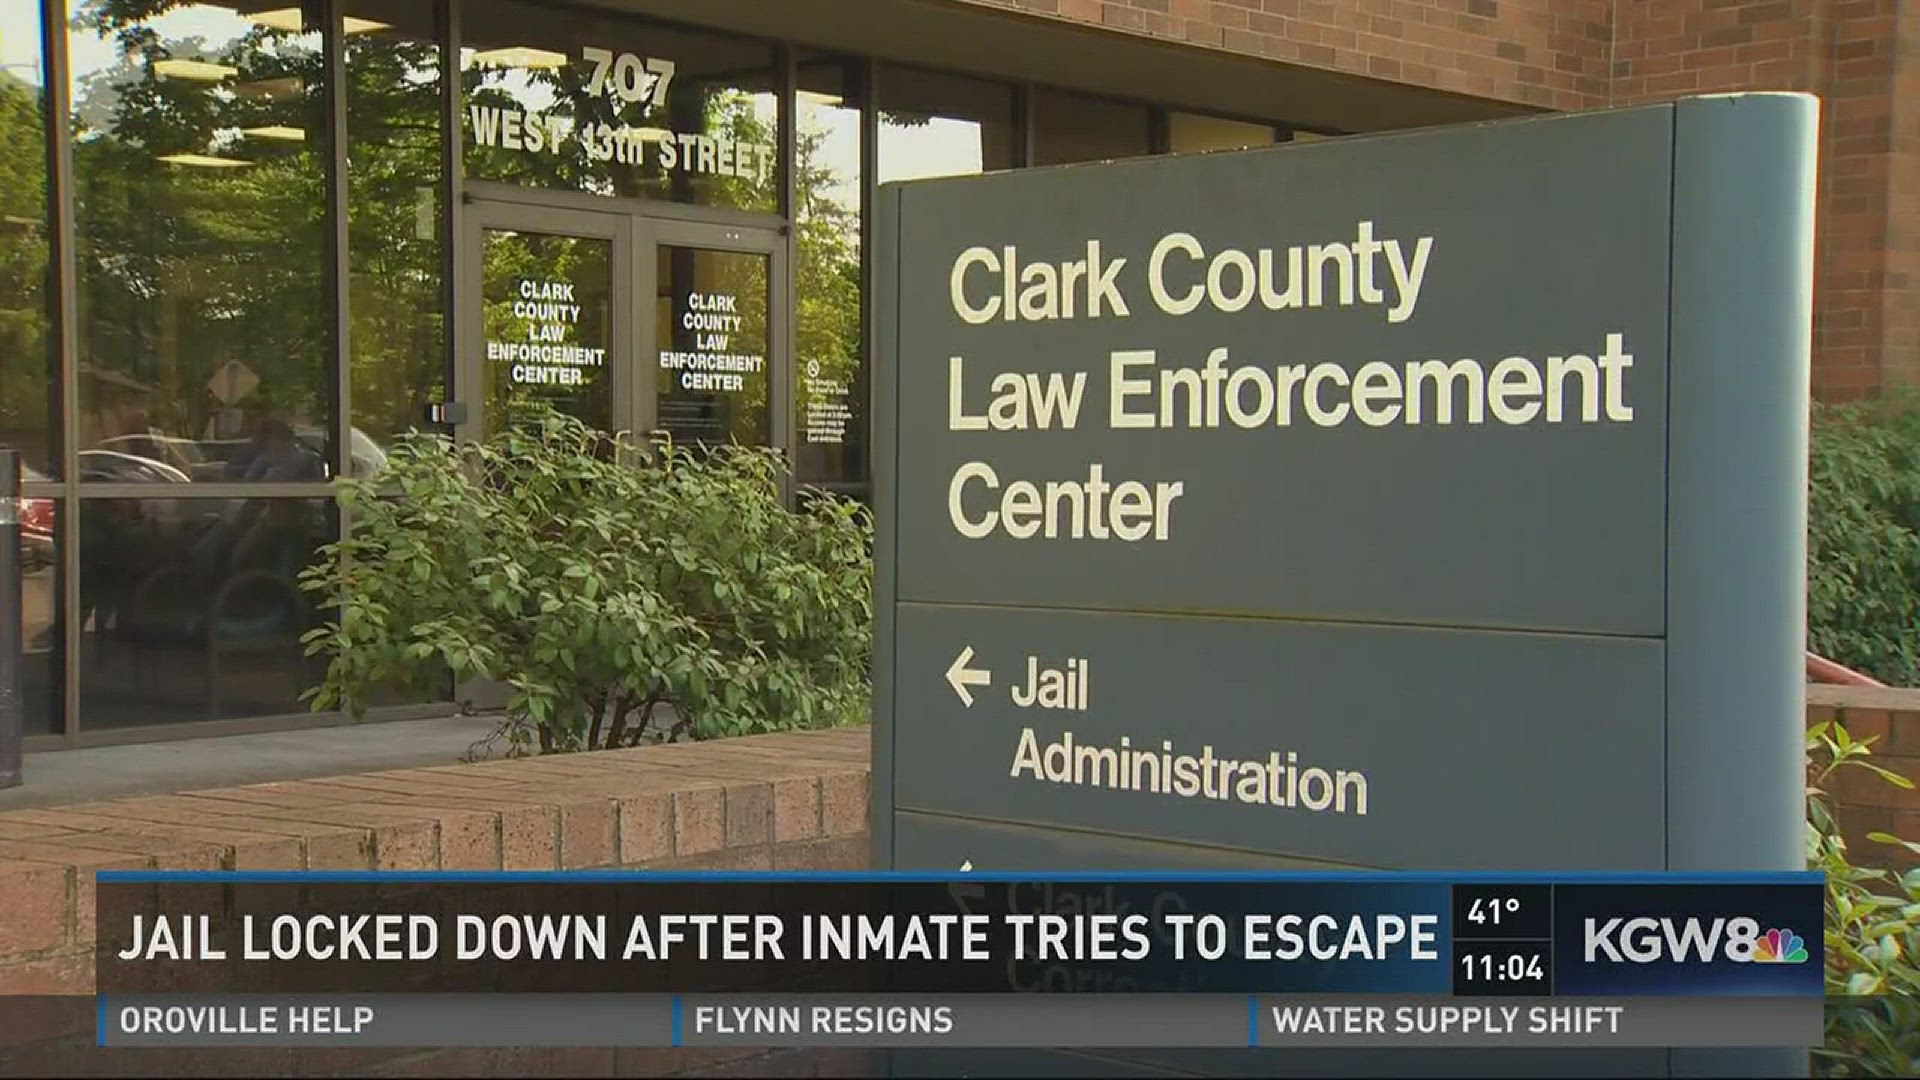 Jail locked down after inmate tries to escape